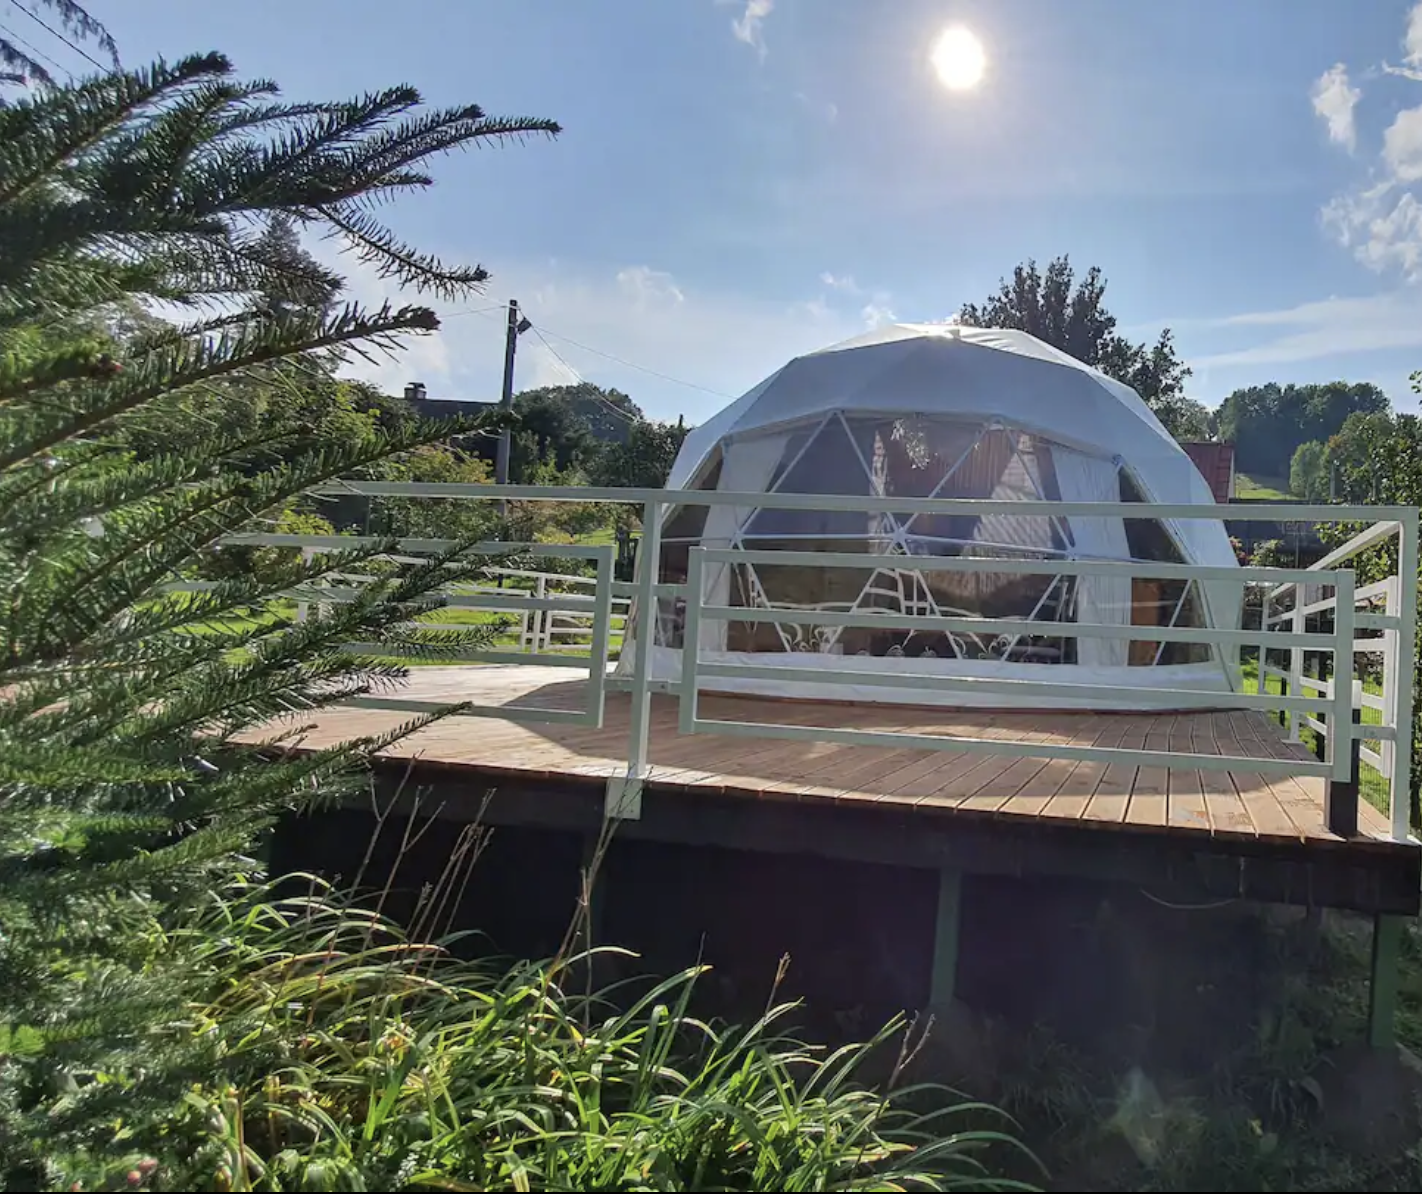 white geodesic dome on wooden deck in the garden